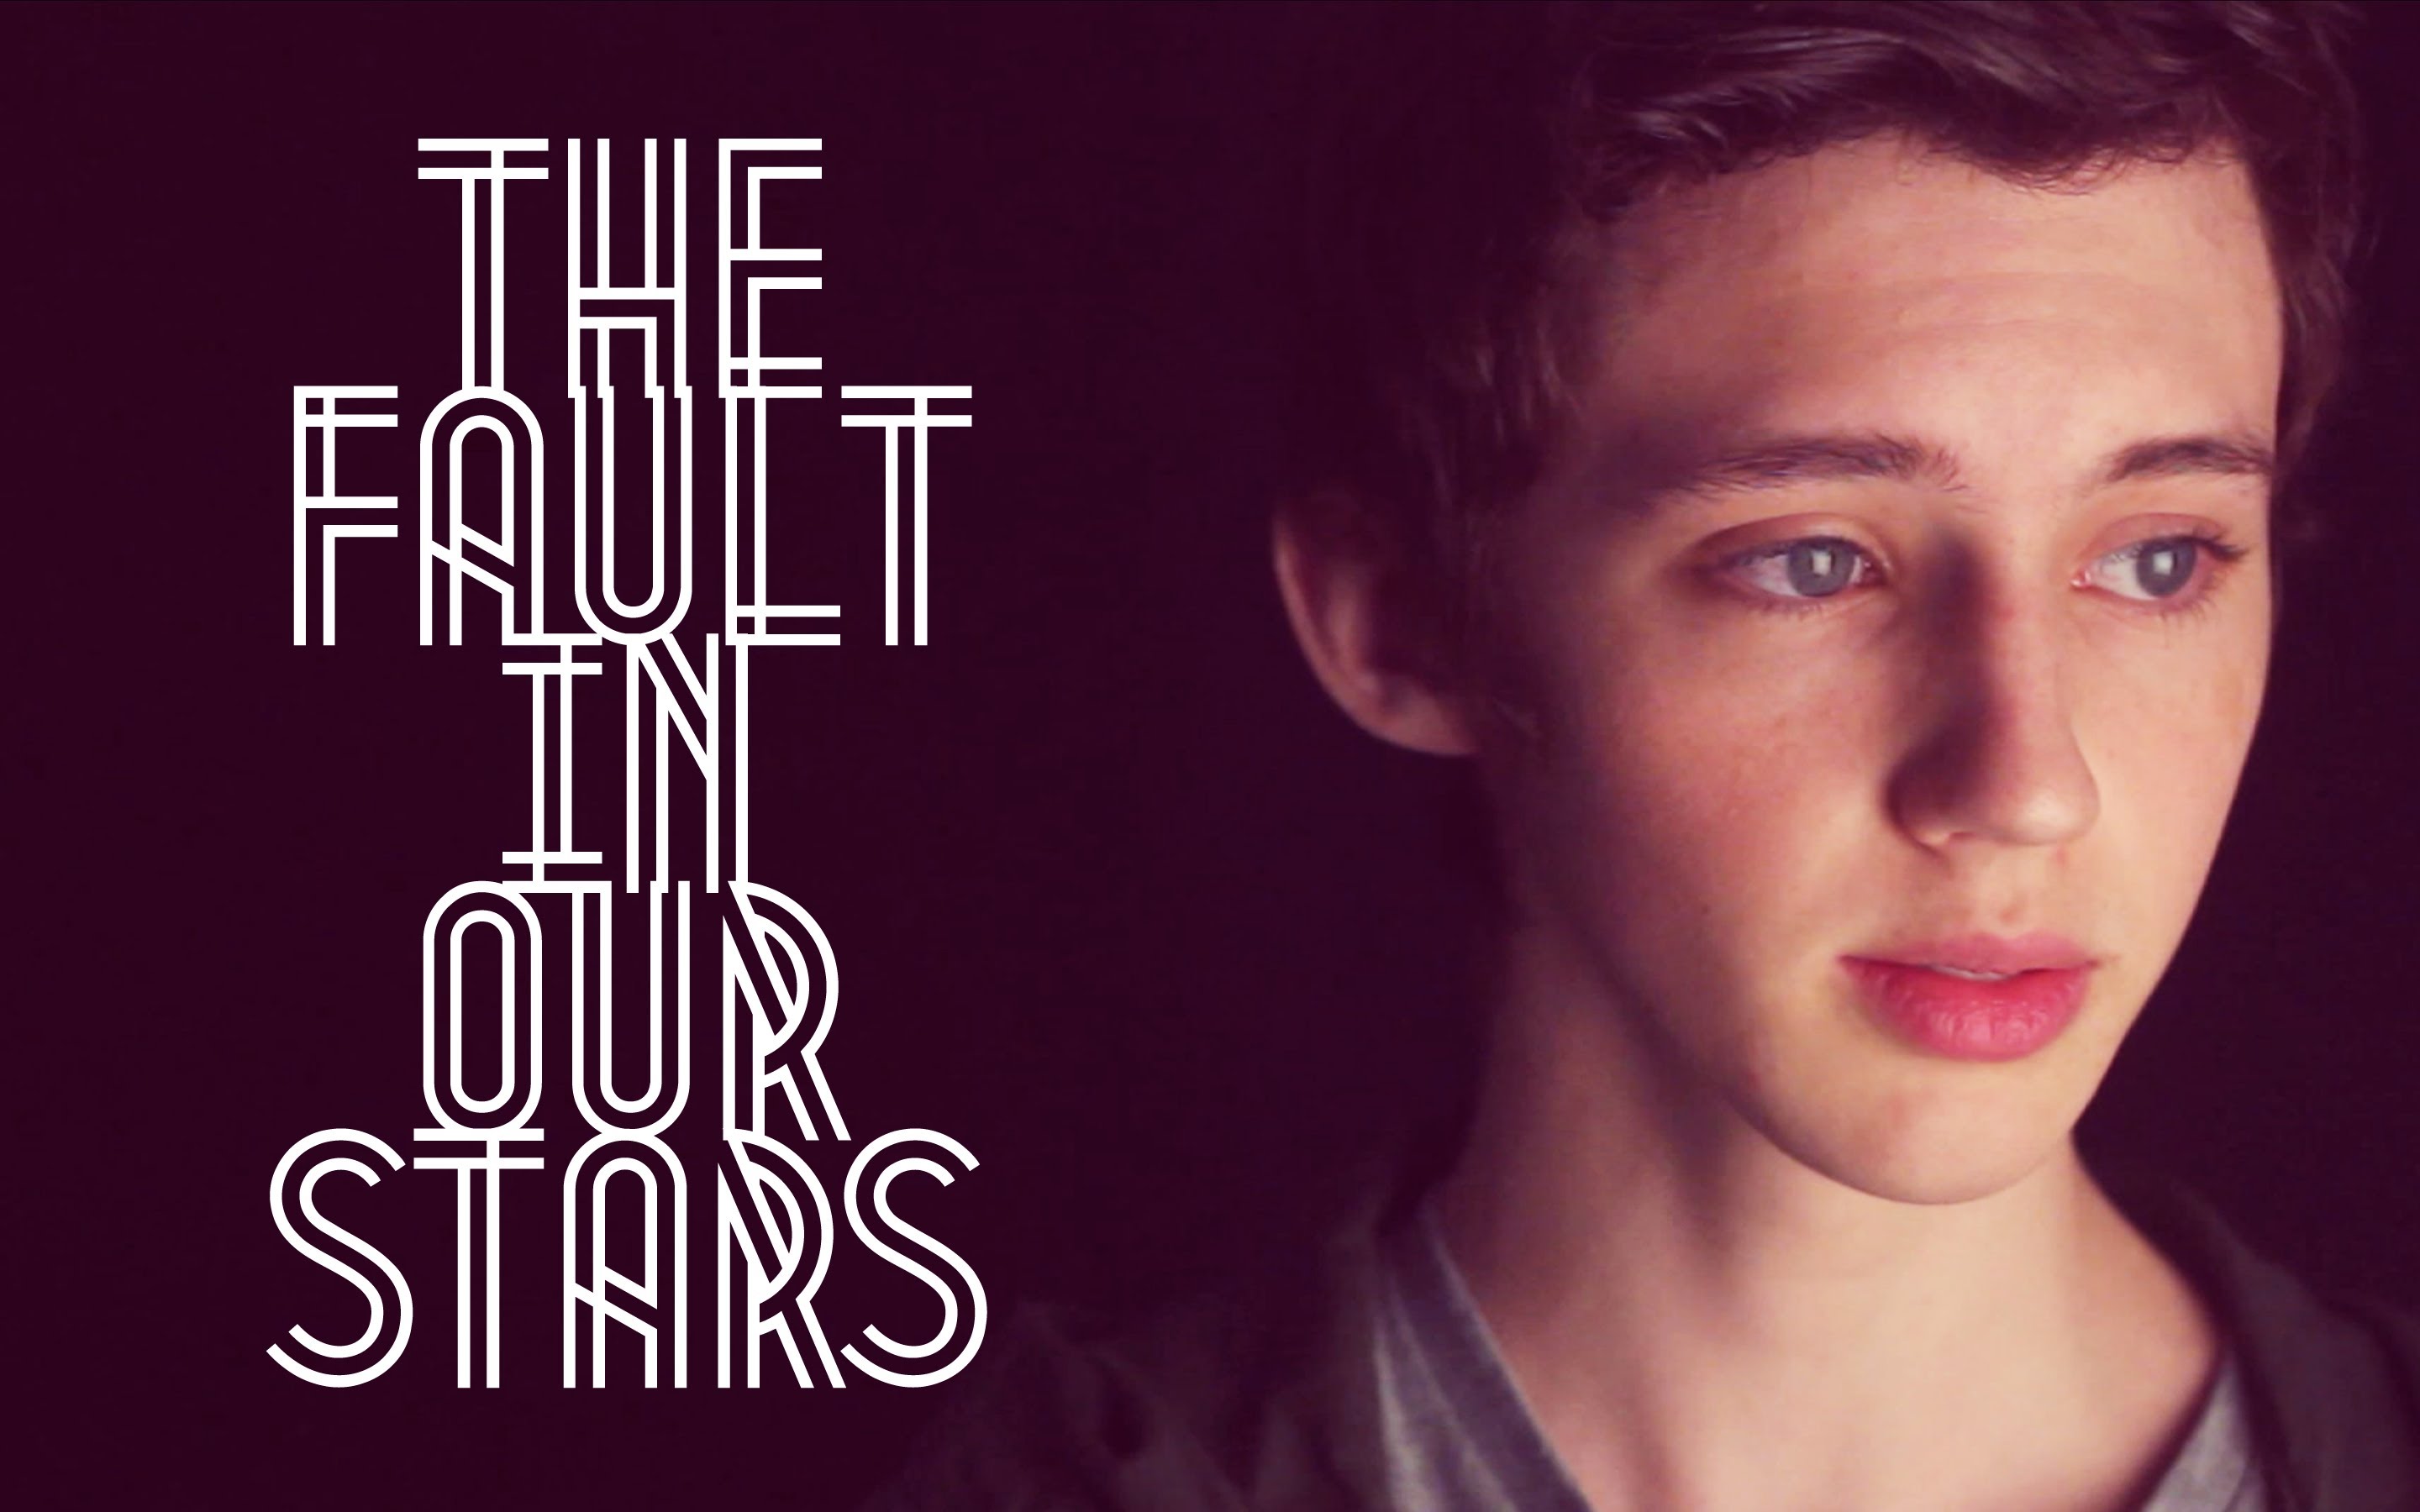 Troye Sivan - The Fault In Our Stars